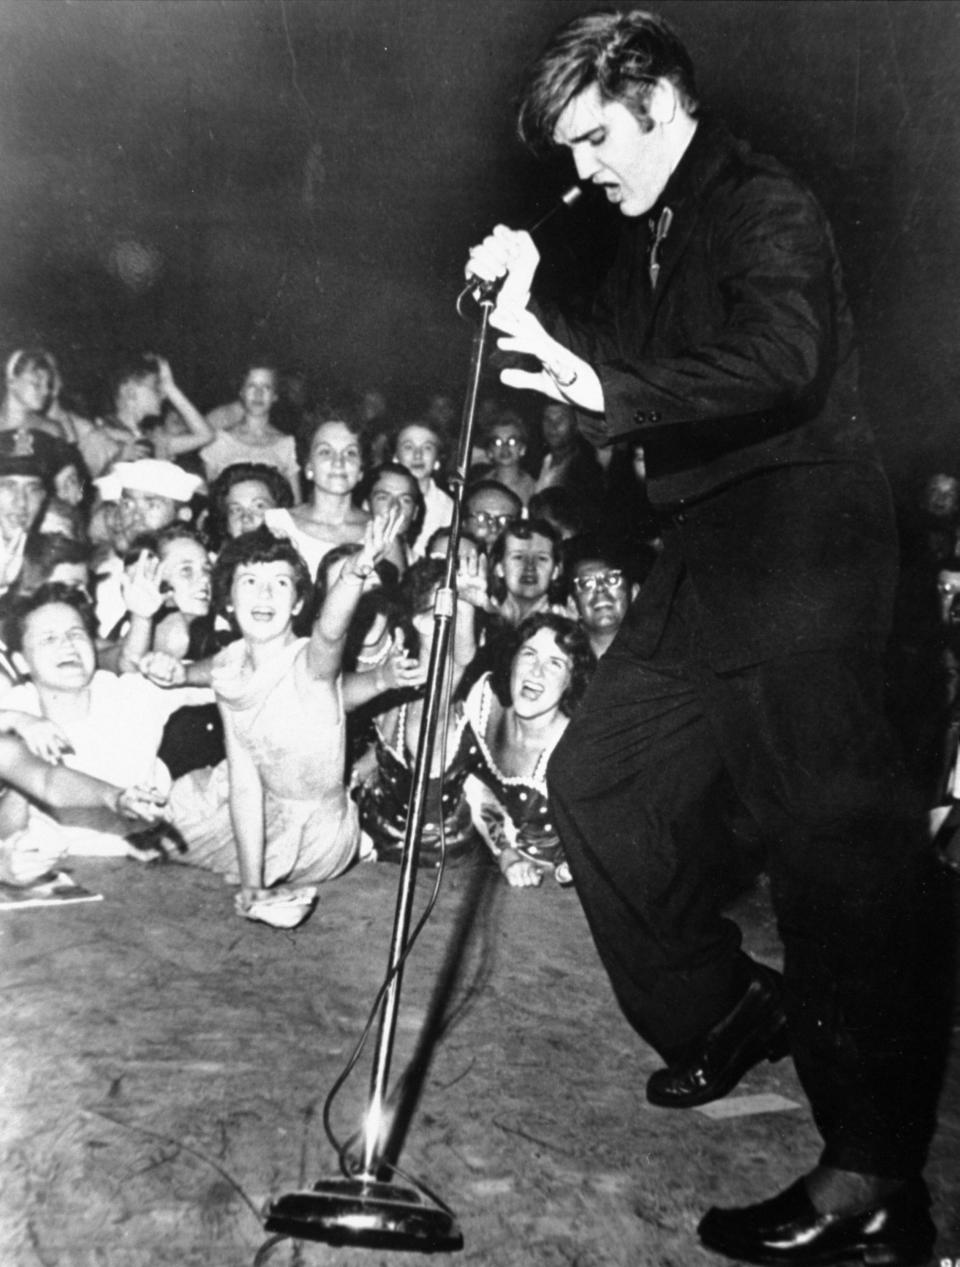 Elvis Presley shakes, rattles, and rolls as he performs in 1956.